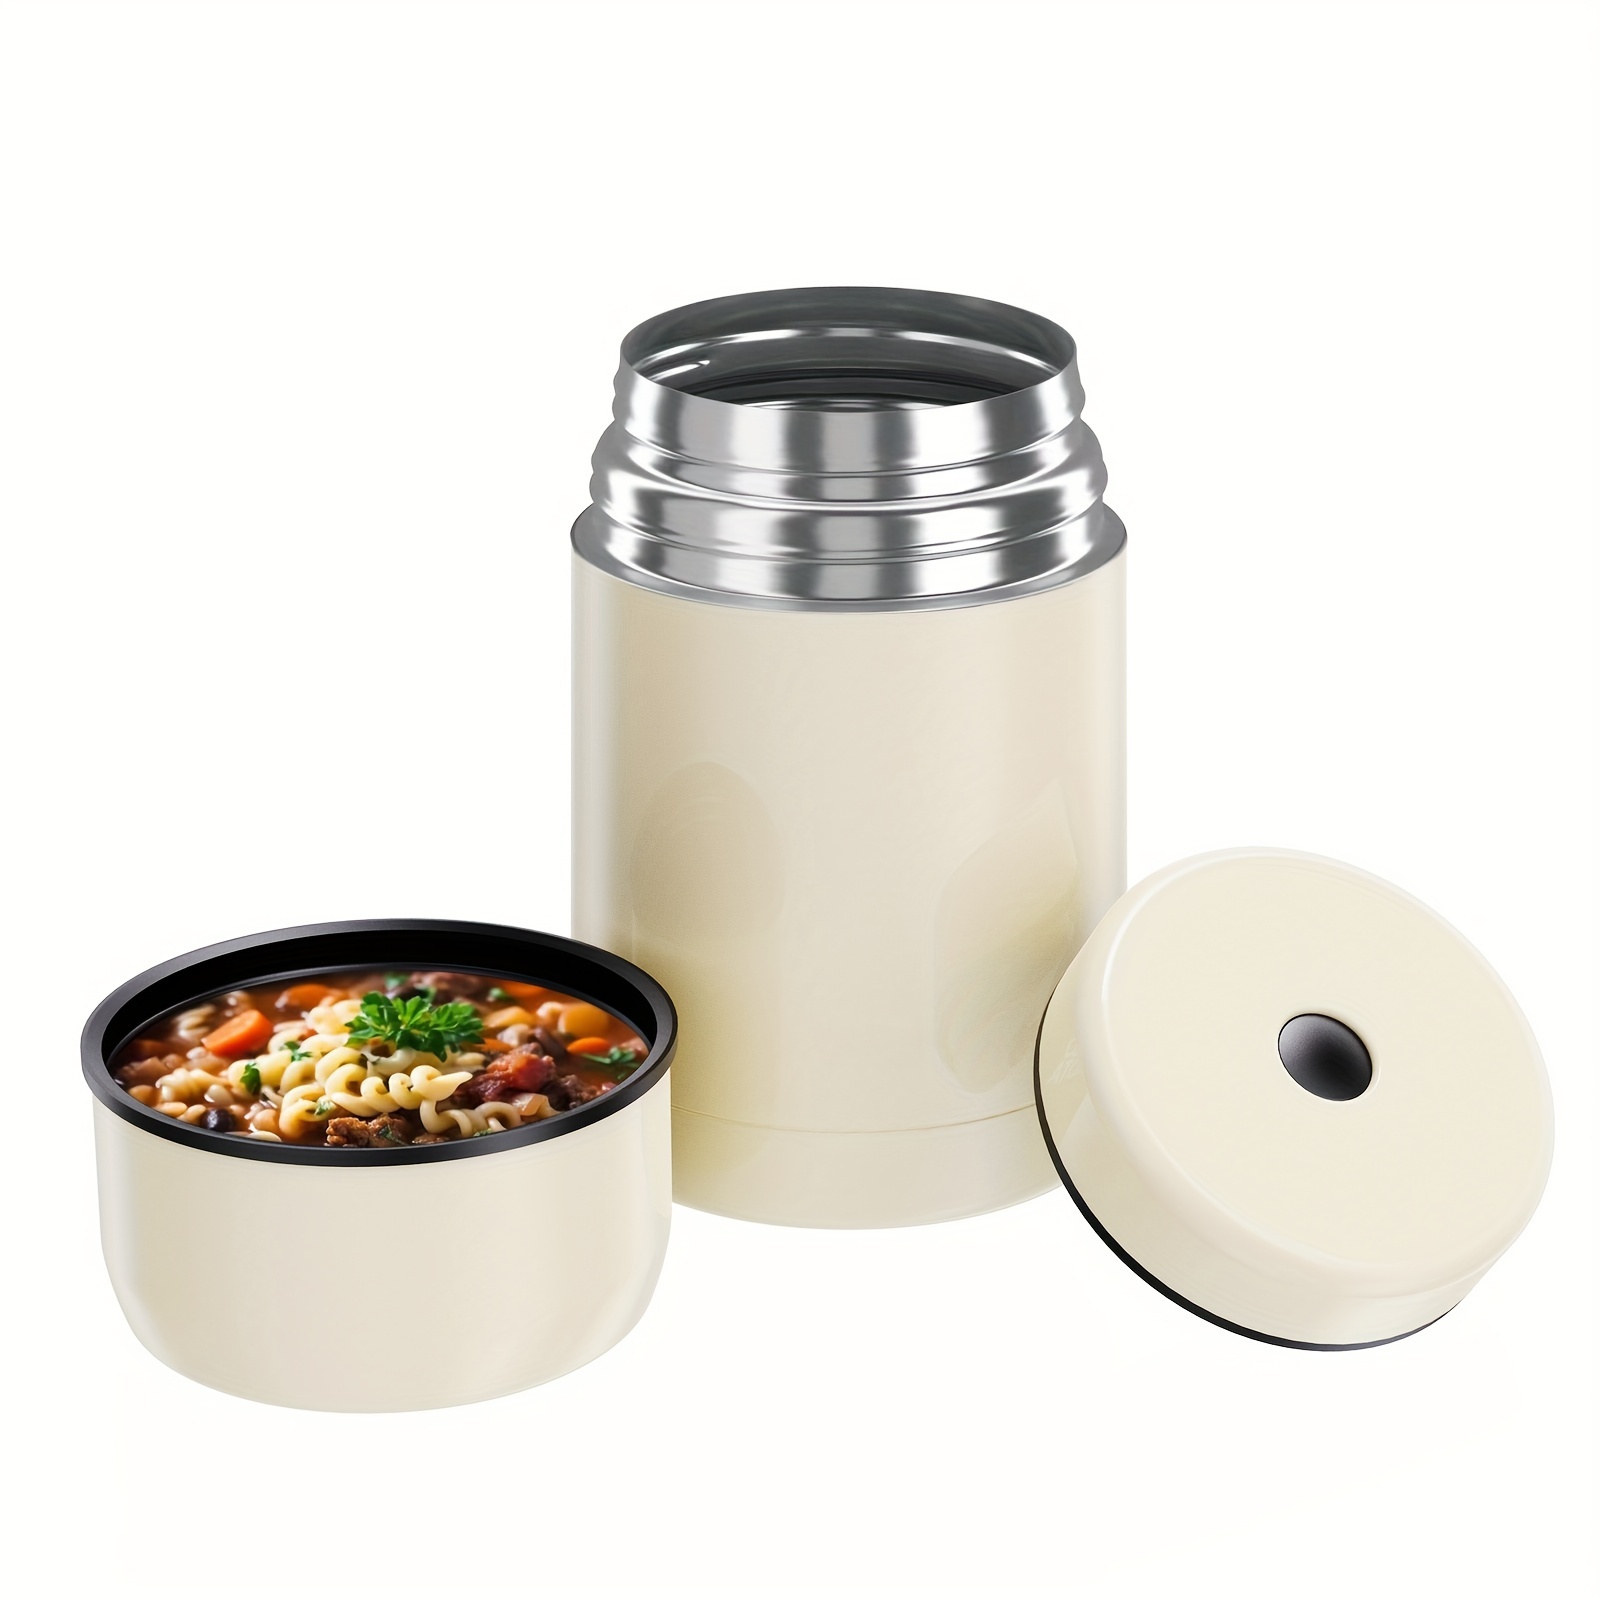 

Vacuum Insulated Stainless Steel Lunch Food Containers 27oz, Wide Mouth Soup For Hot Food, Leak Proof Food Jar For School Office Travel